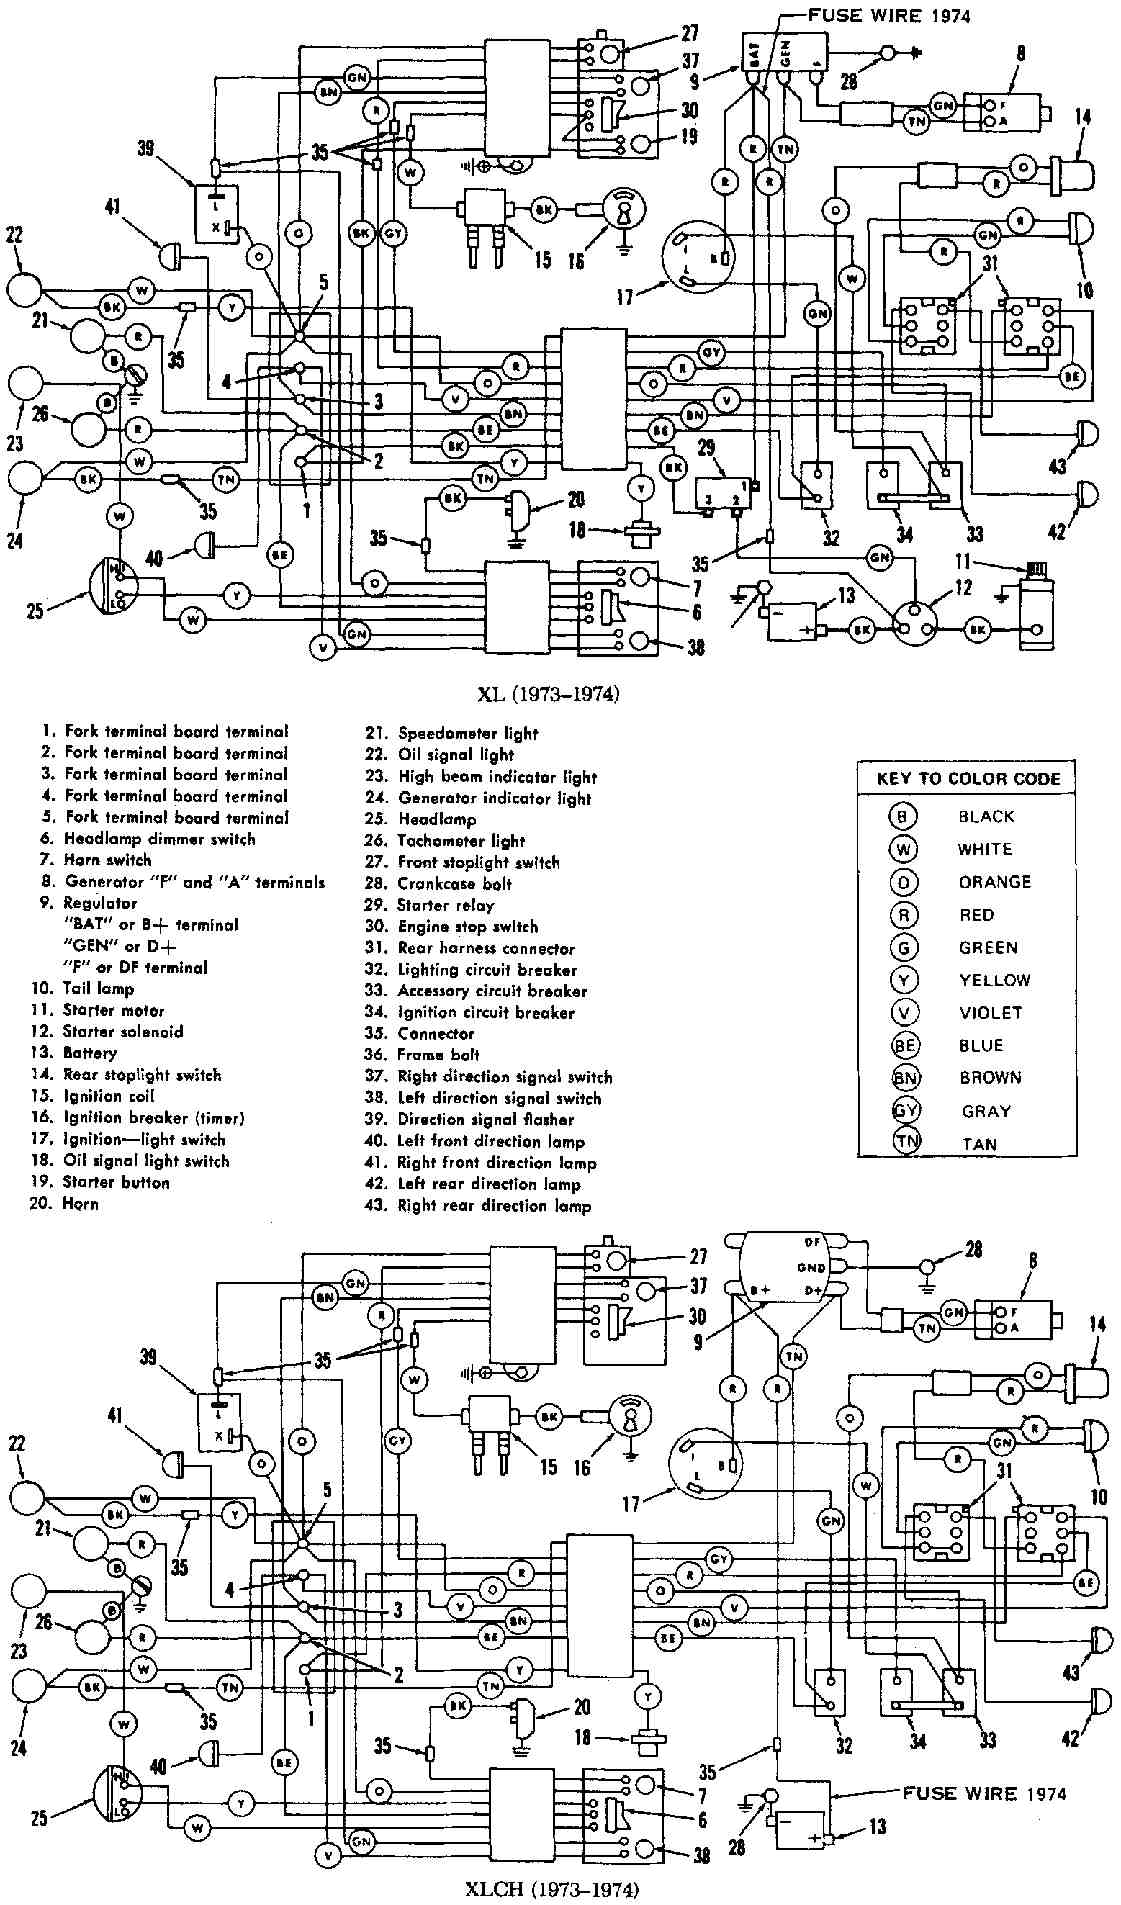 Harley Davidson Ignition Switch Wiring Diagram from www.motorcycle-manual.com